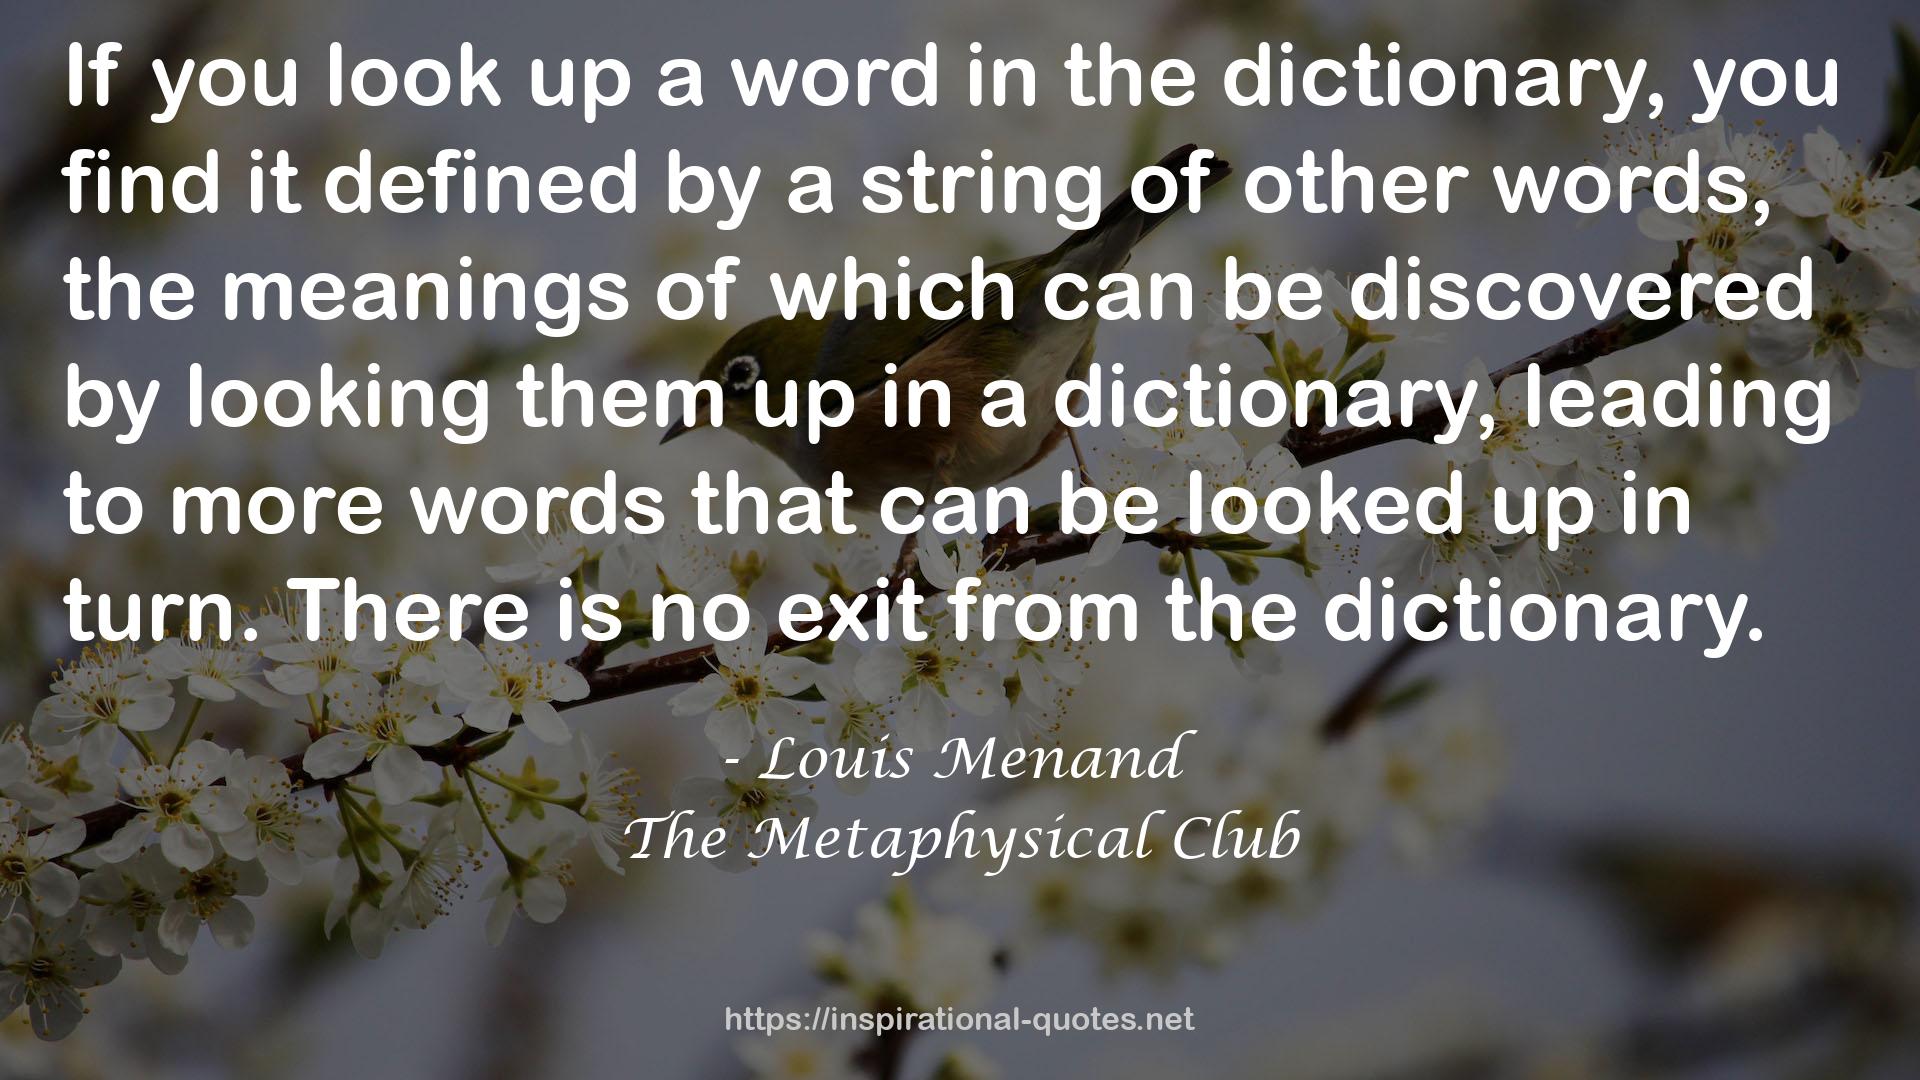 The Metaphysical Club QUOTES